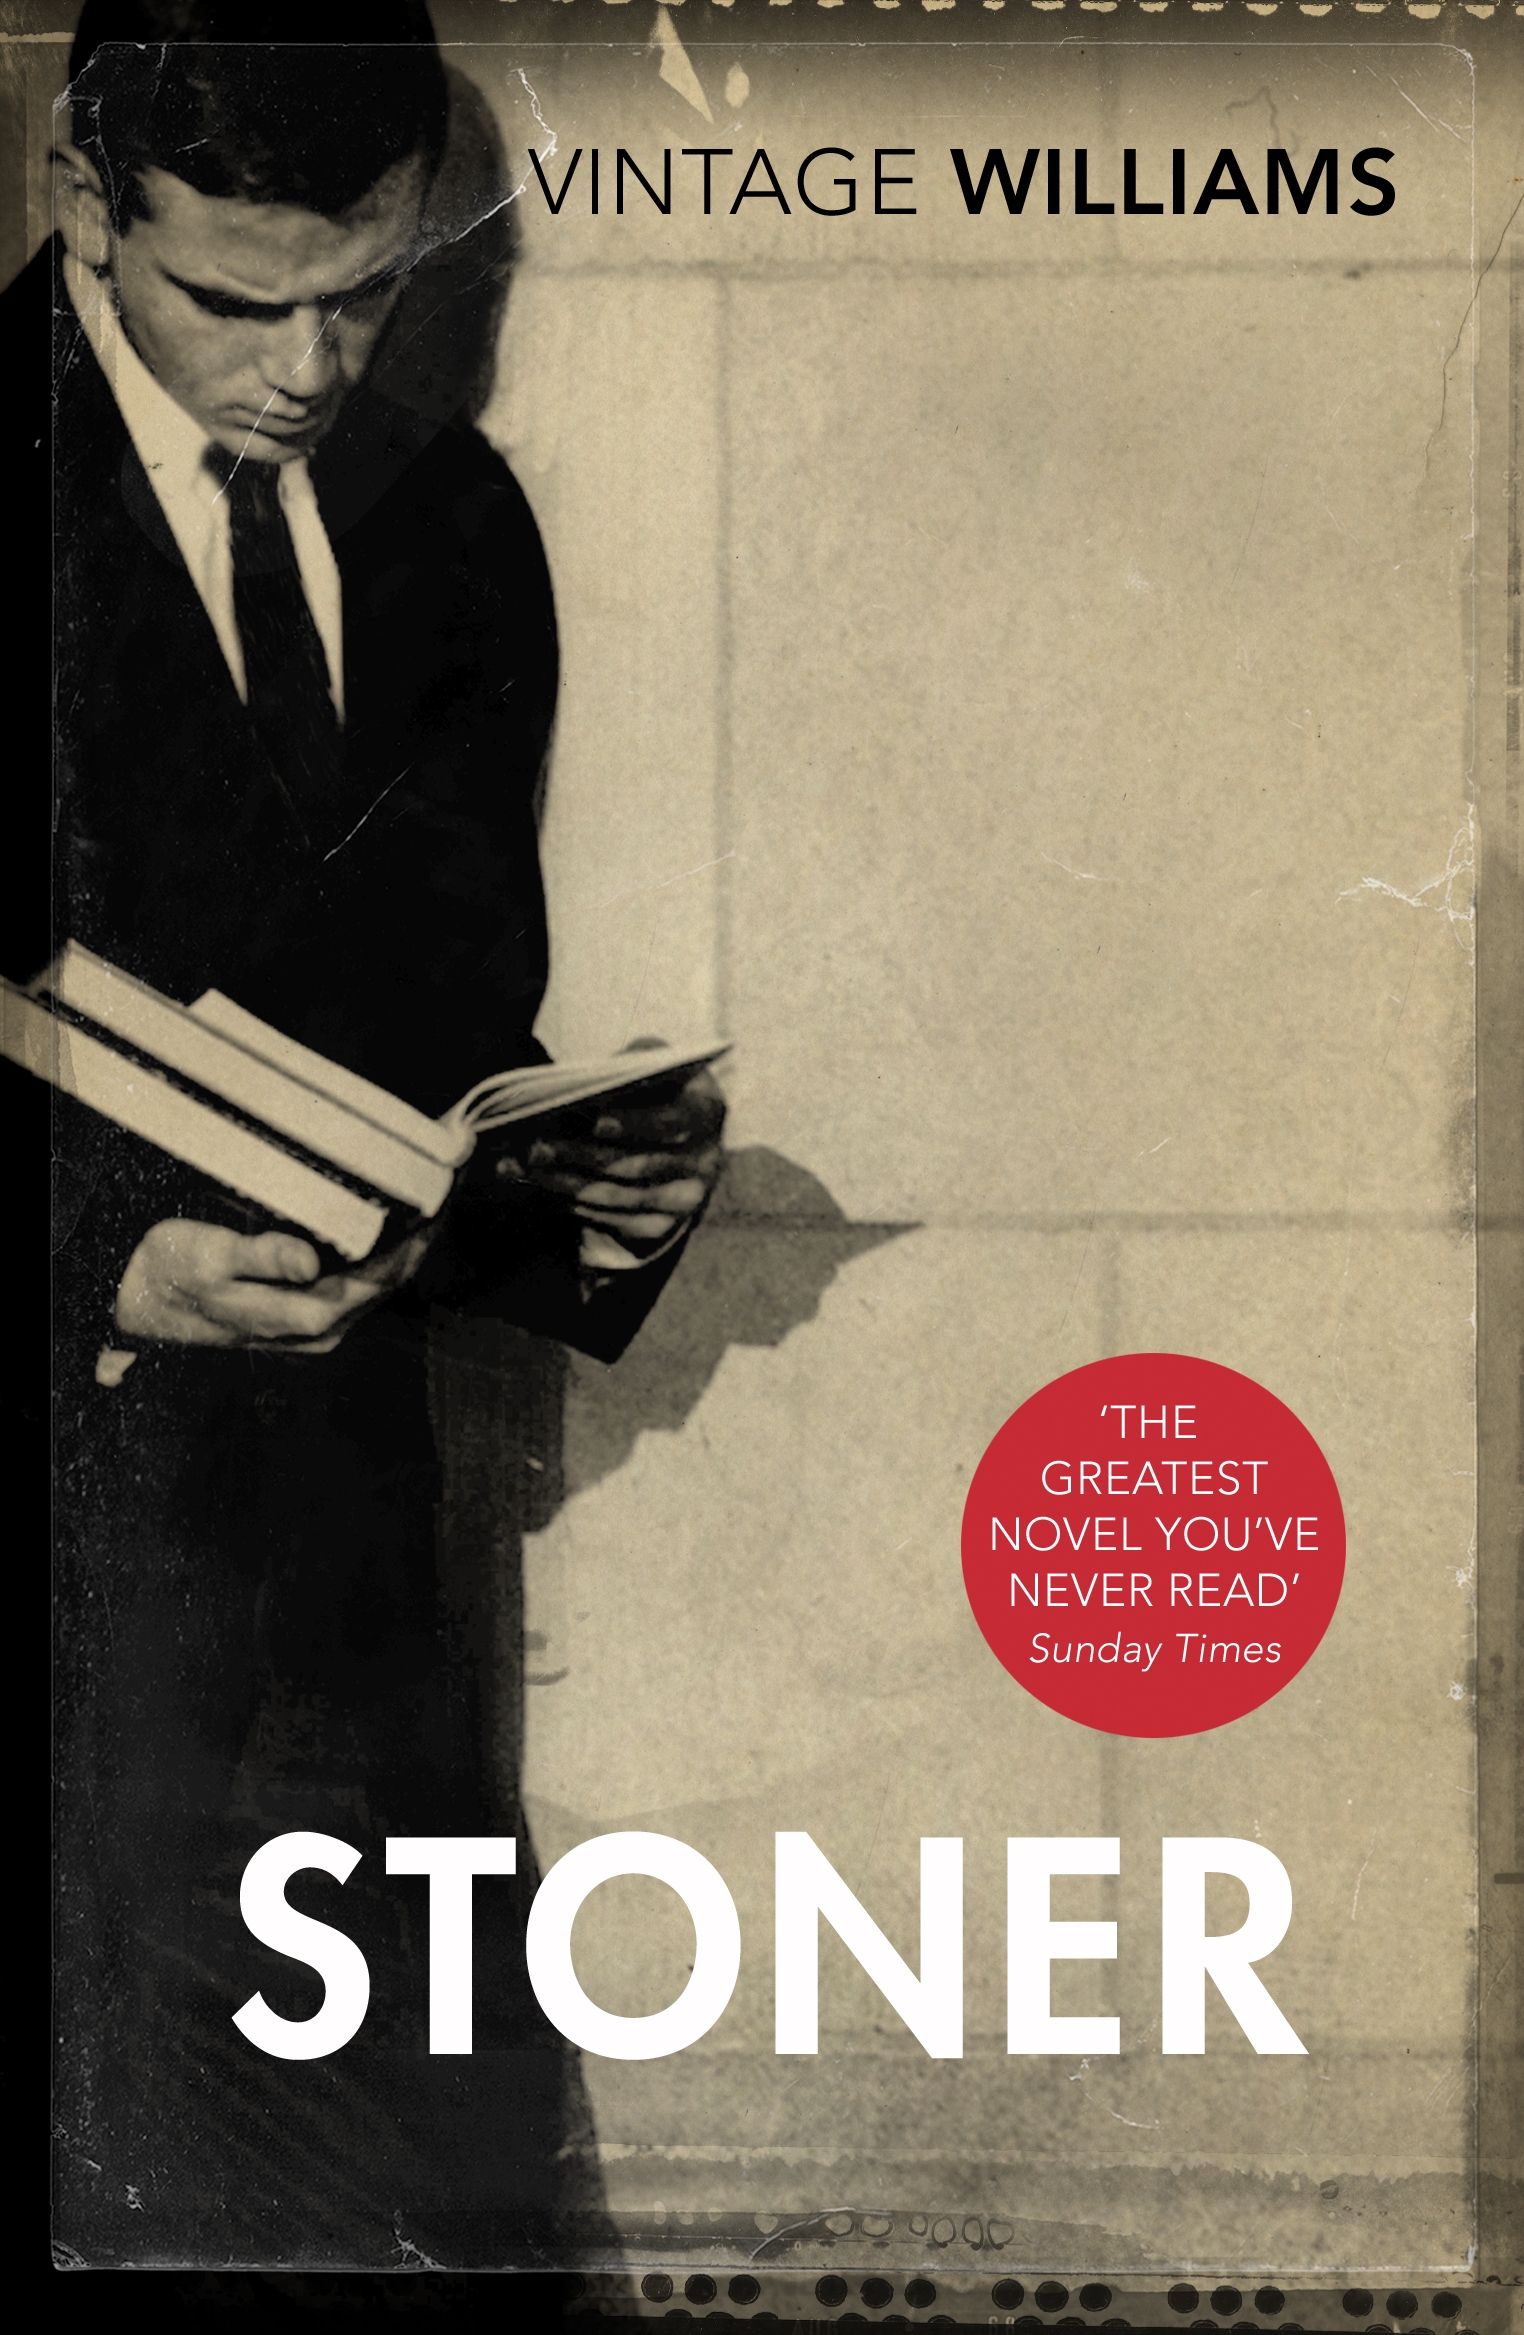 The cover of the book Stoner by John Williams